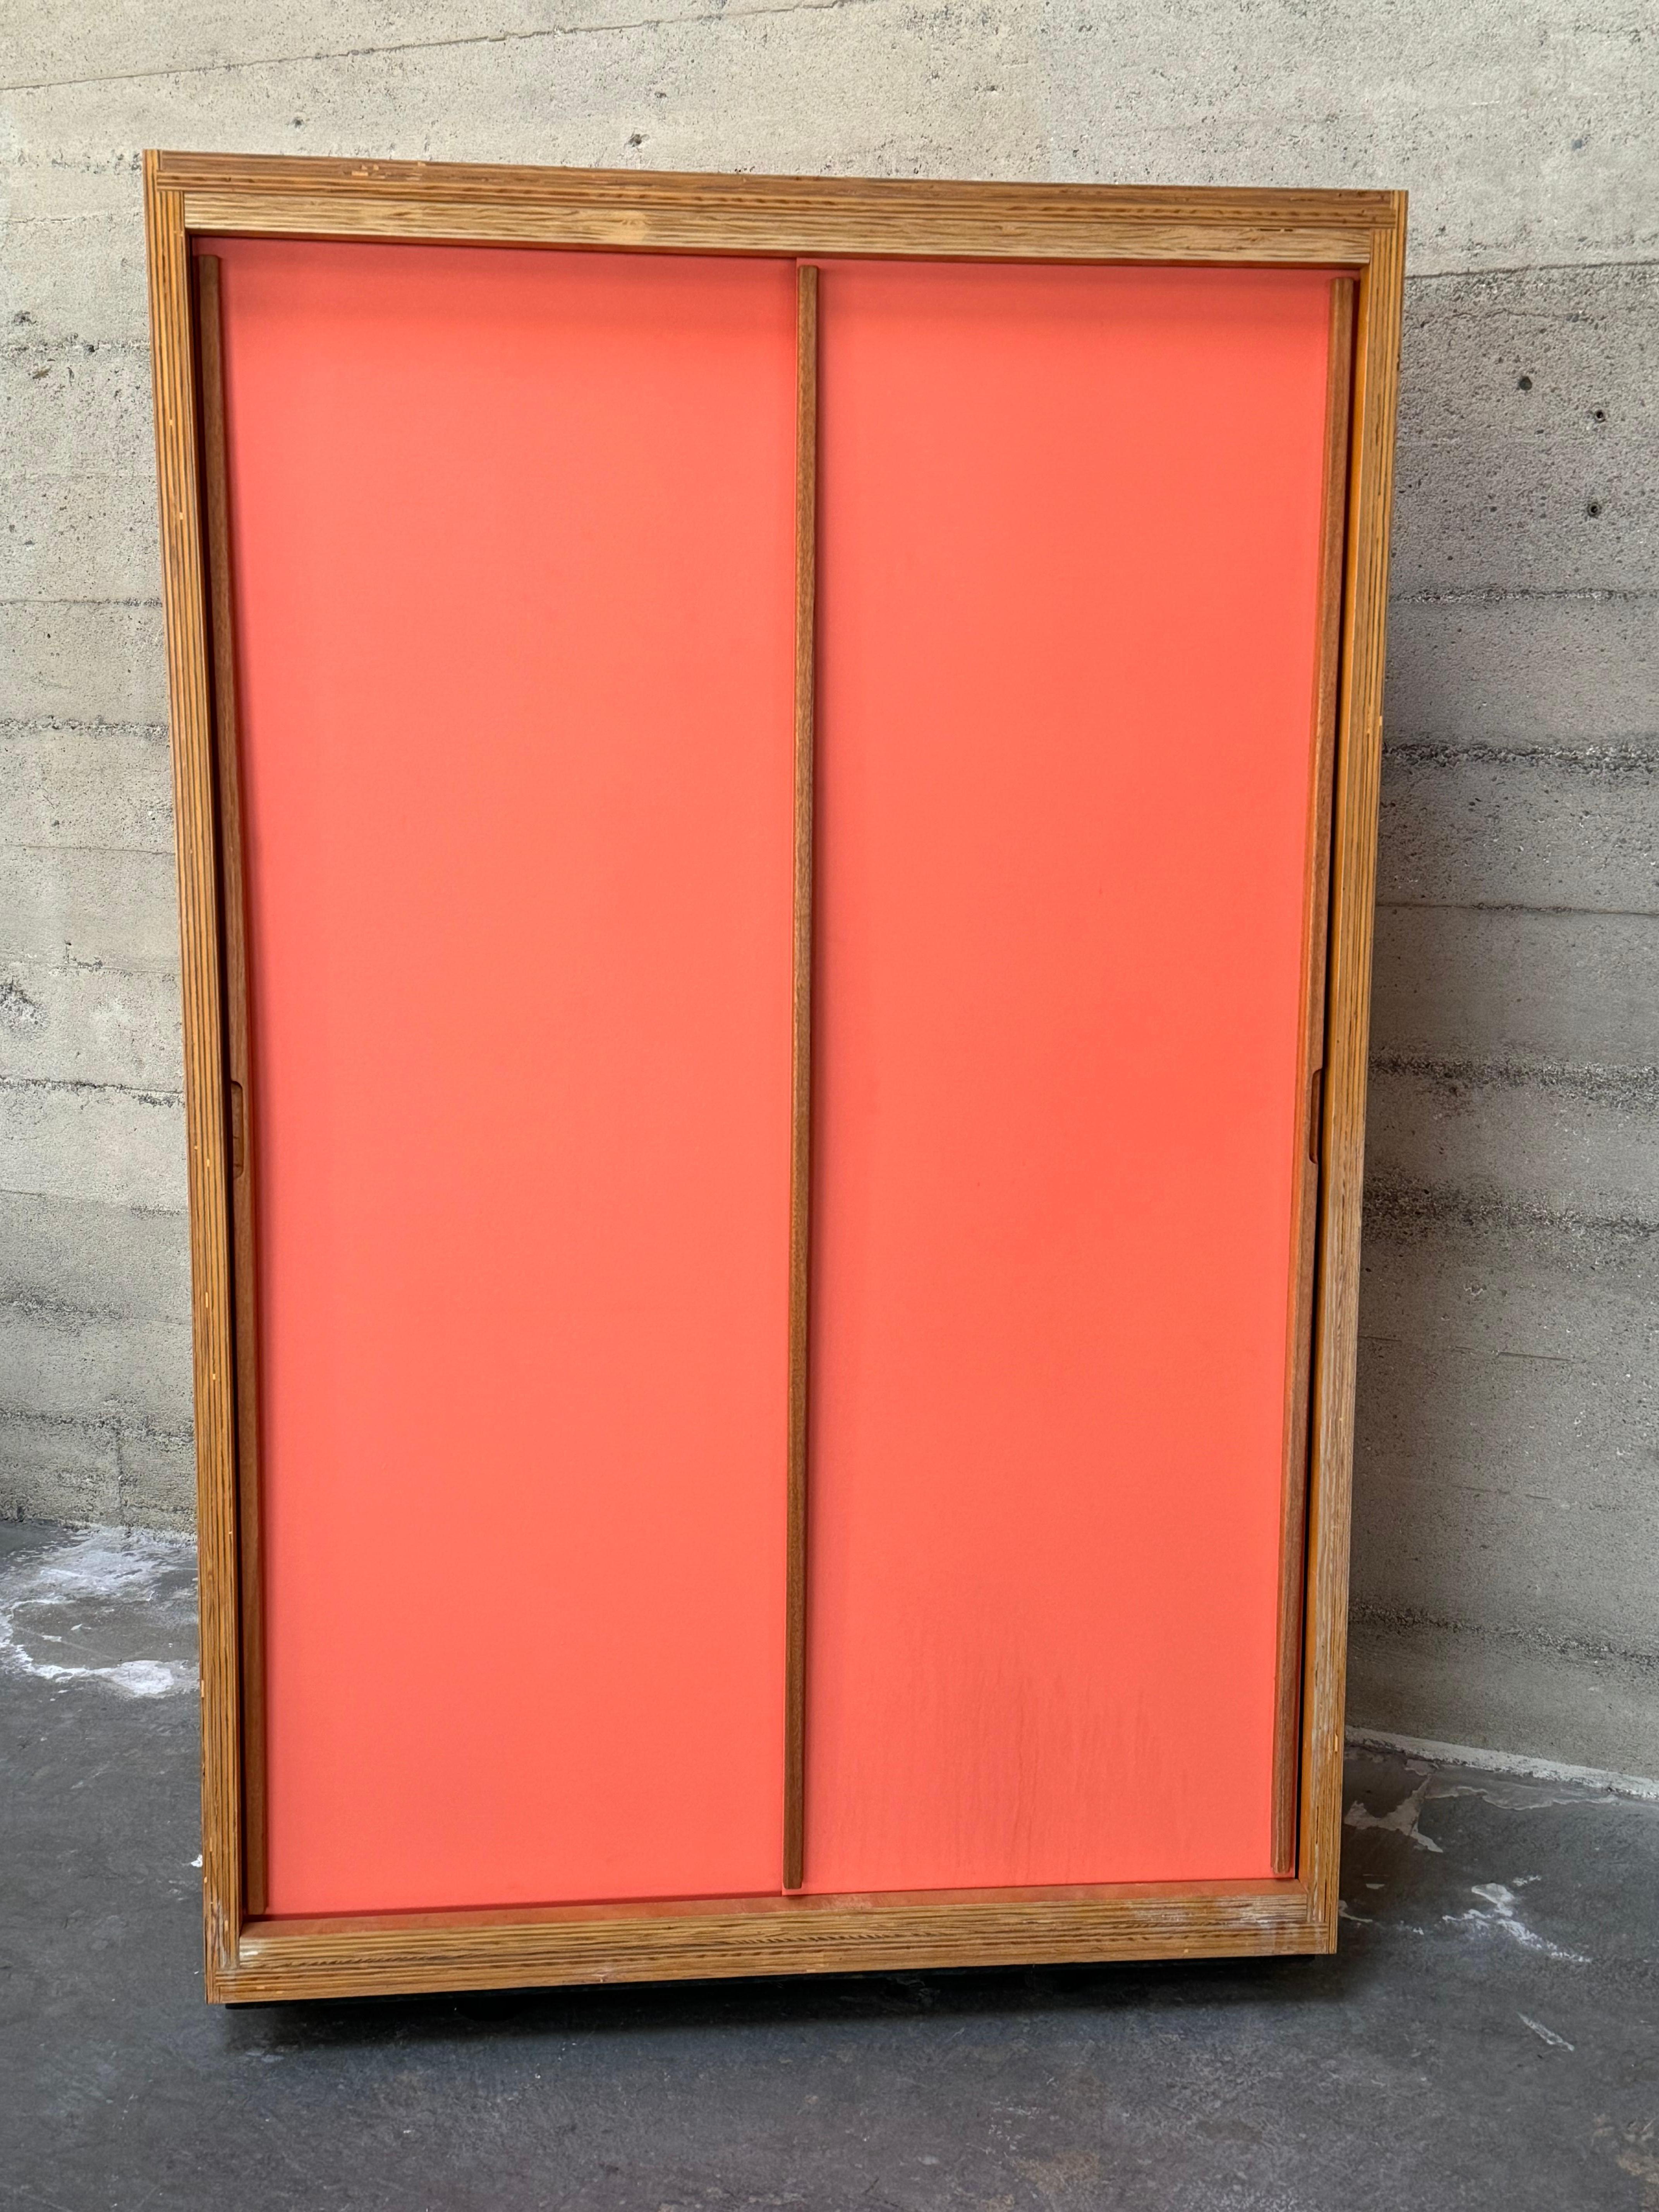 Jean Prouve style cabinets constructed of high grade figurative plywood. With a statuesque present and scale, a true and unique stand out. The two sliding doors are in a salmon pink color with pulls that extend from top to bottom of the cabinet and